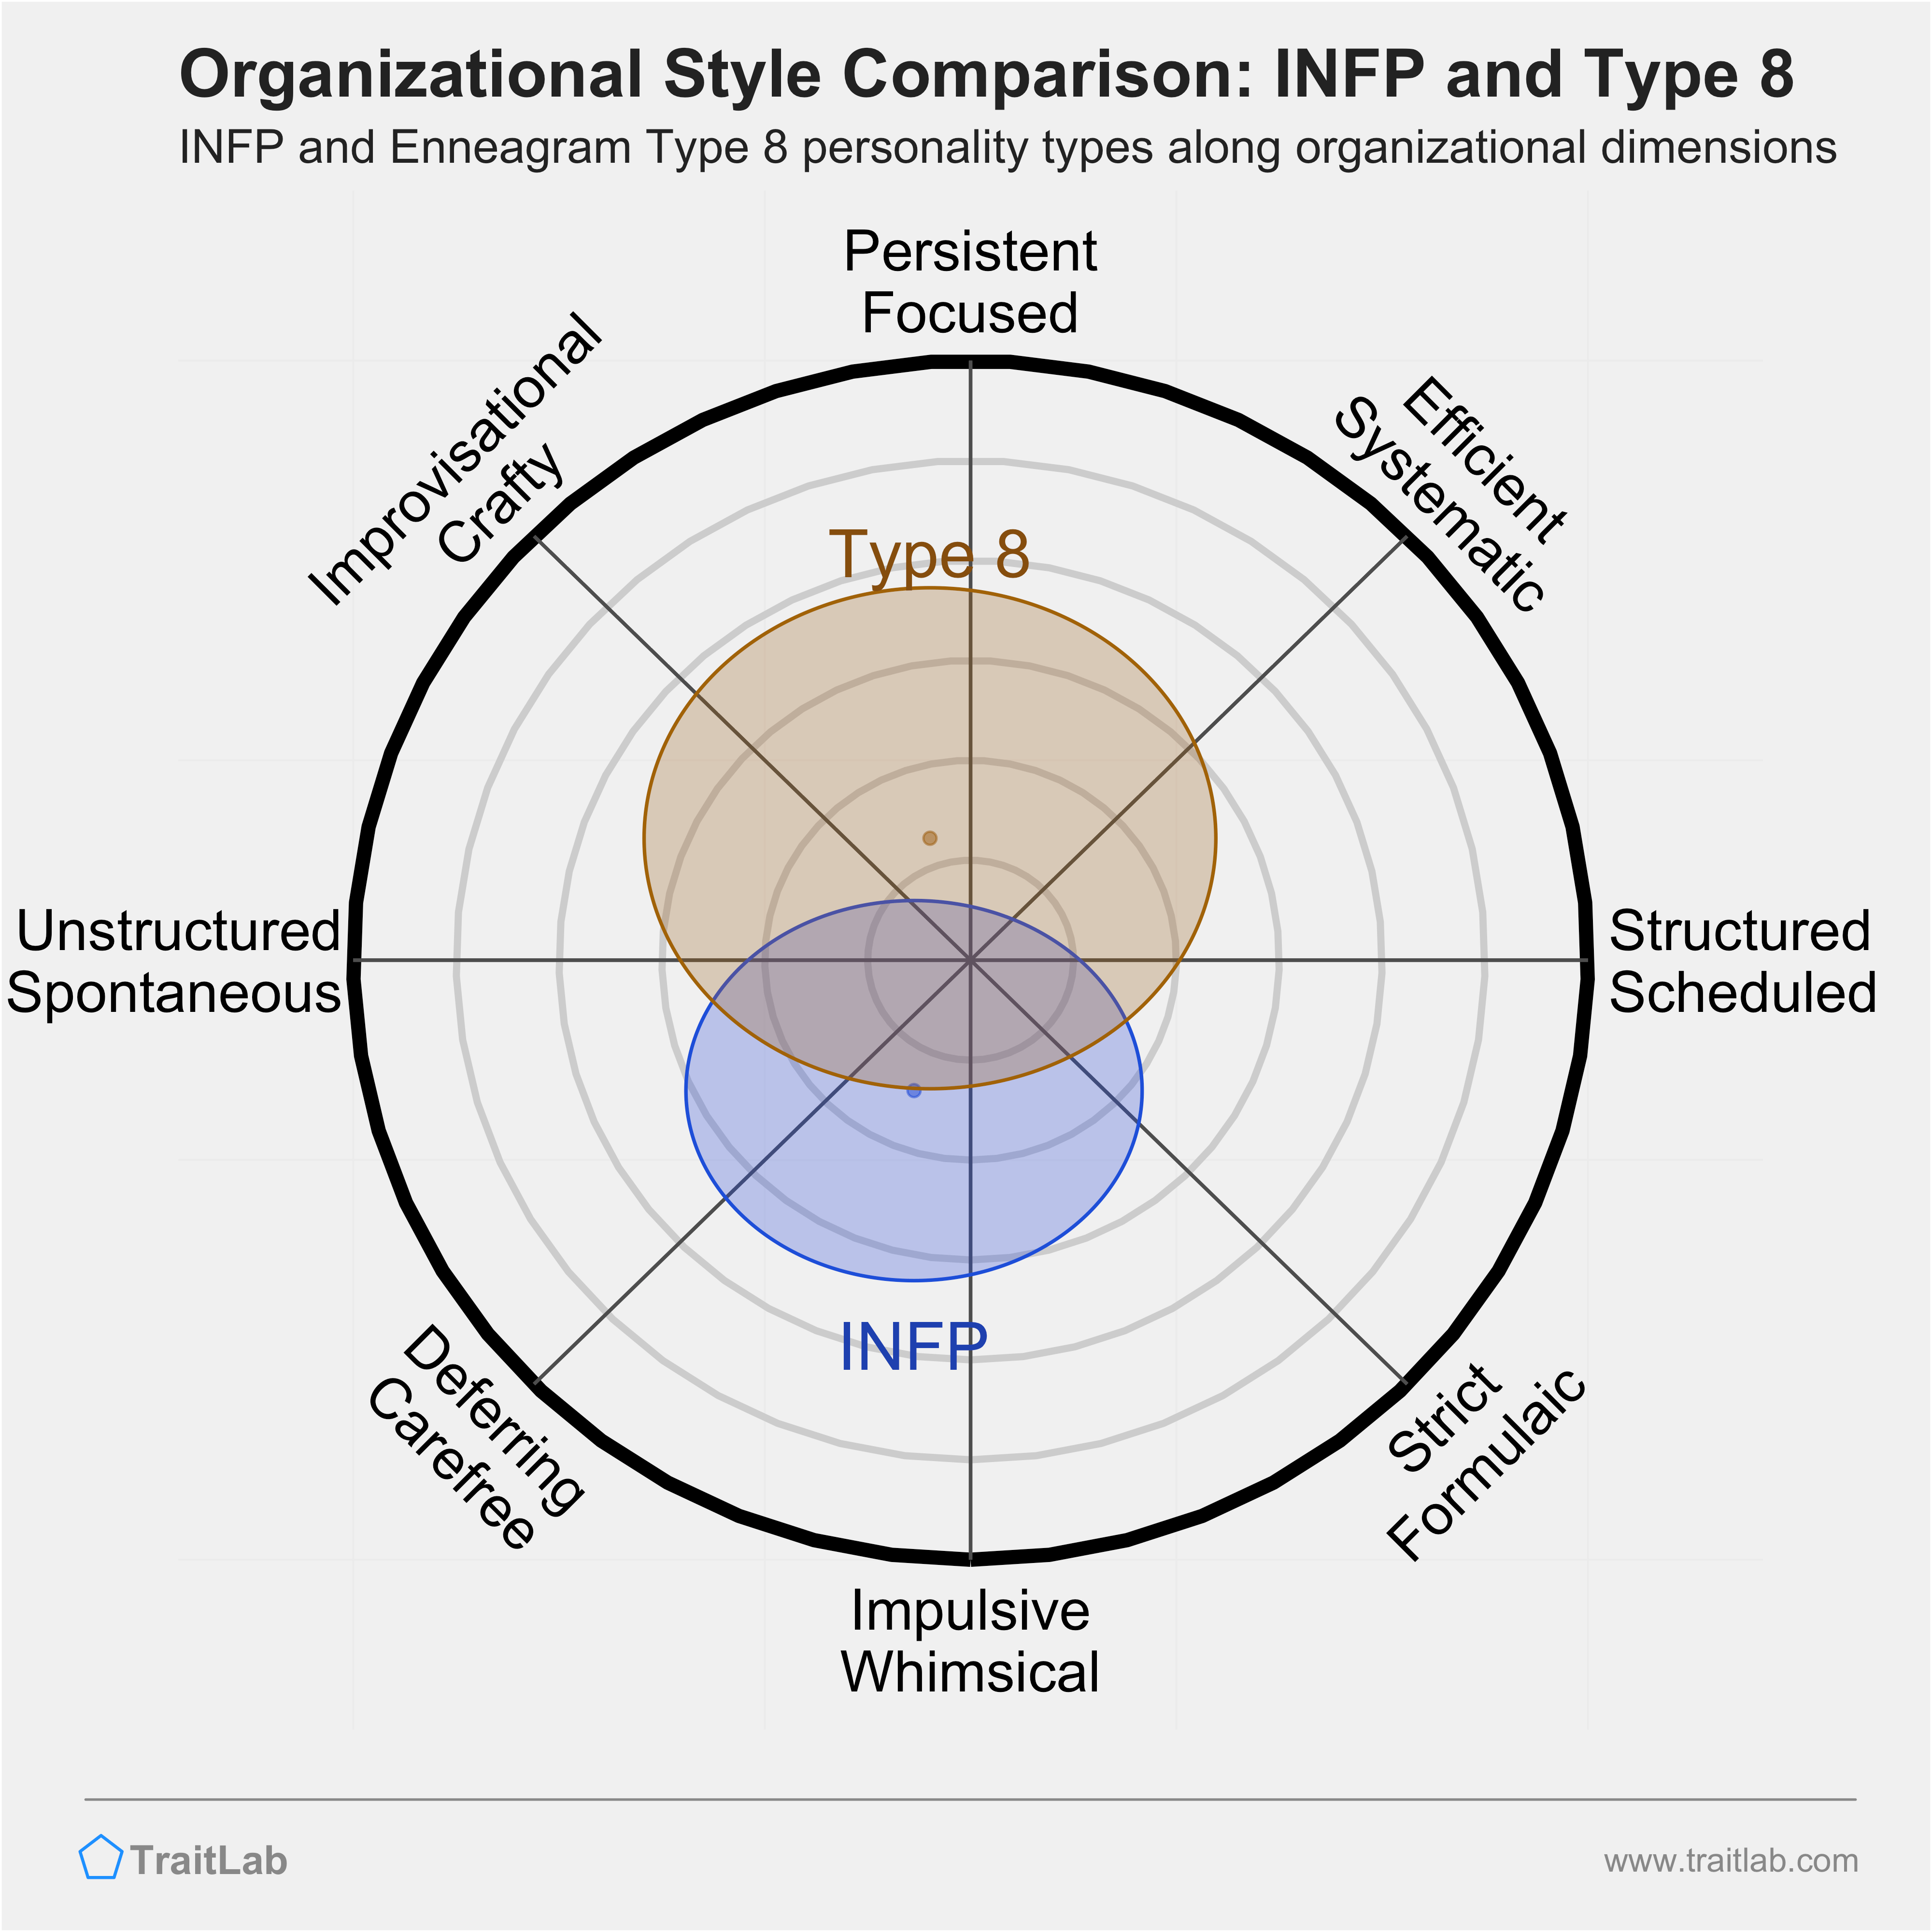 INFP and Type 8 comparison across organizational dimensions